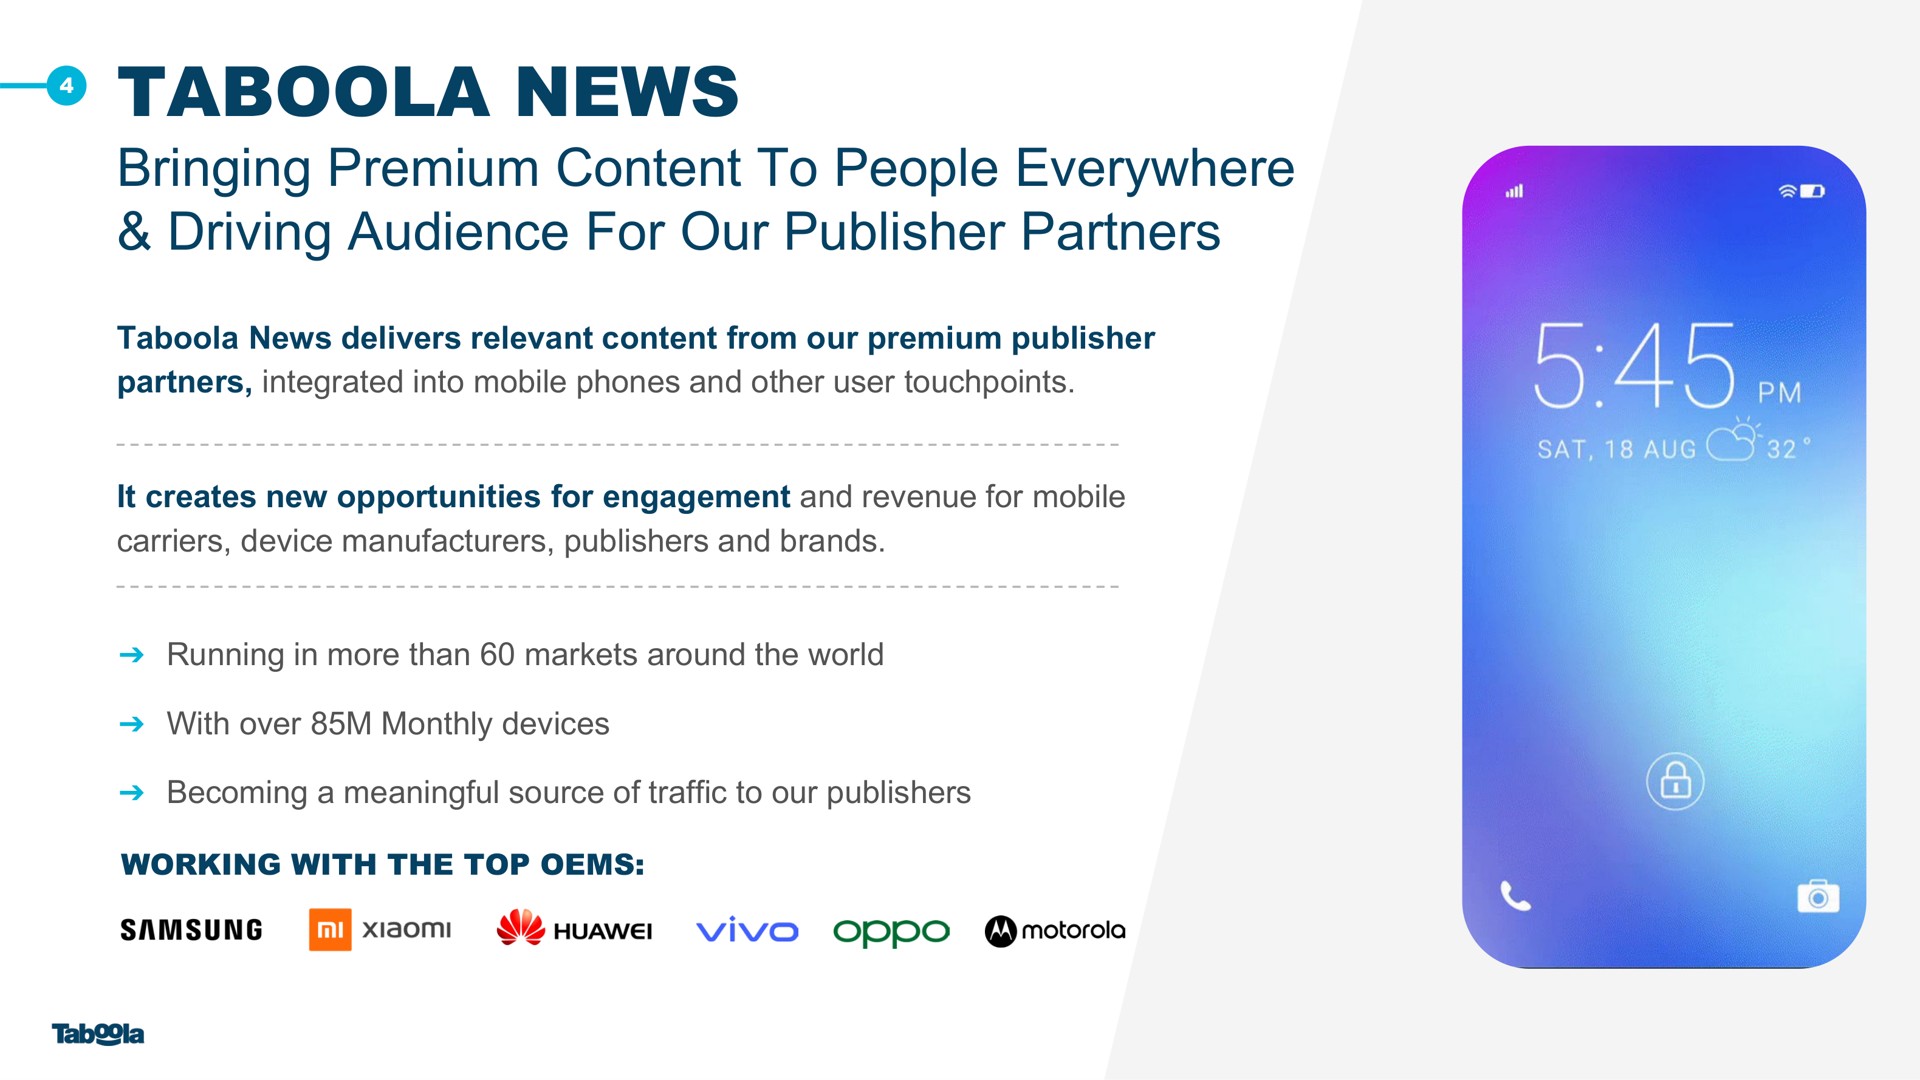 news bringing premium content to people everywhere driving audience for our publisher partners | Taboola